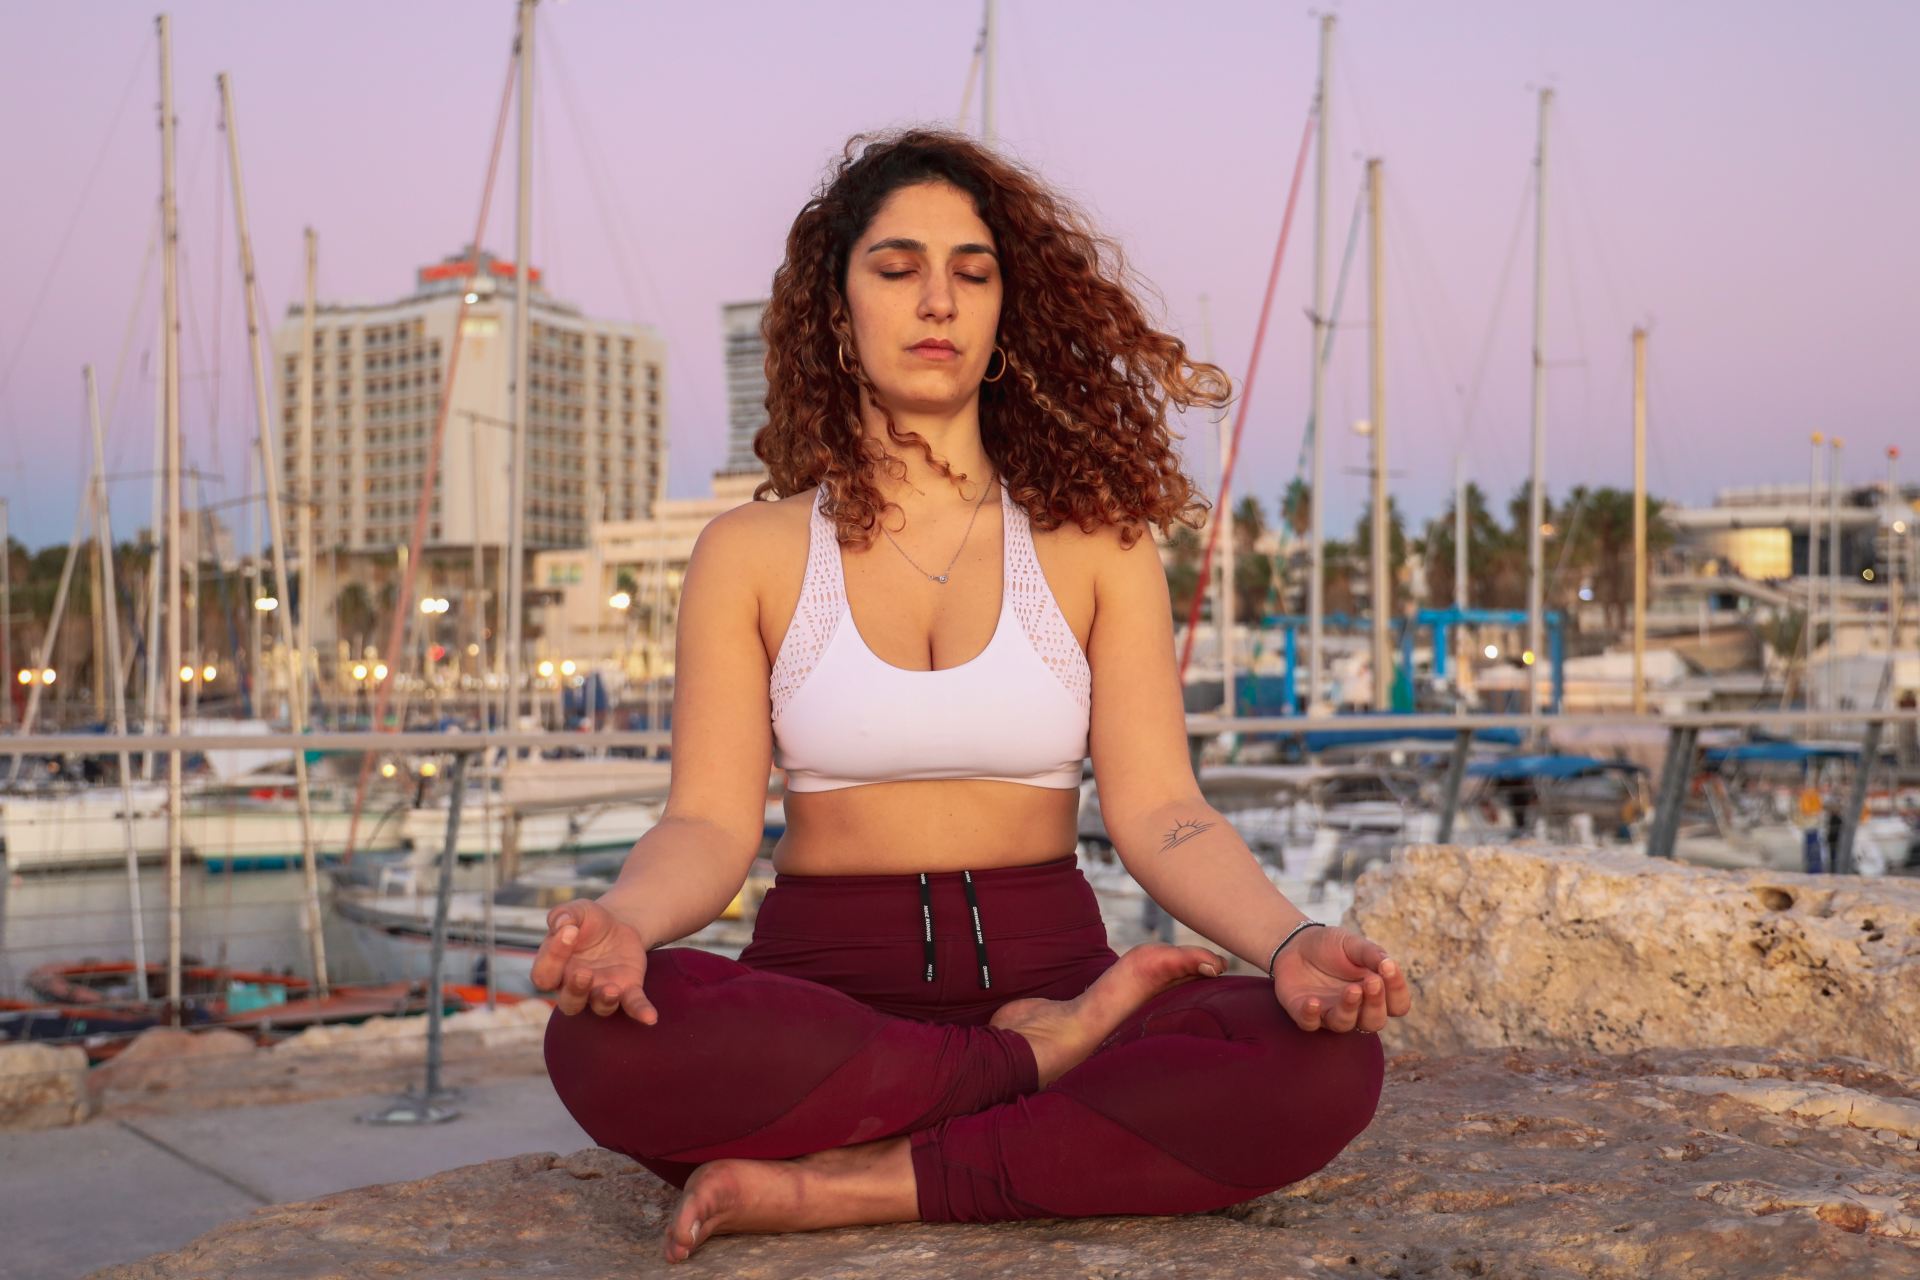 woman wearing white sports bra and red leggings sitting while doing yoga viewing buildings and boats on body of water during daytime